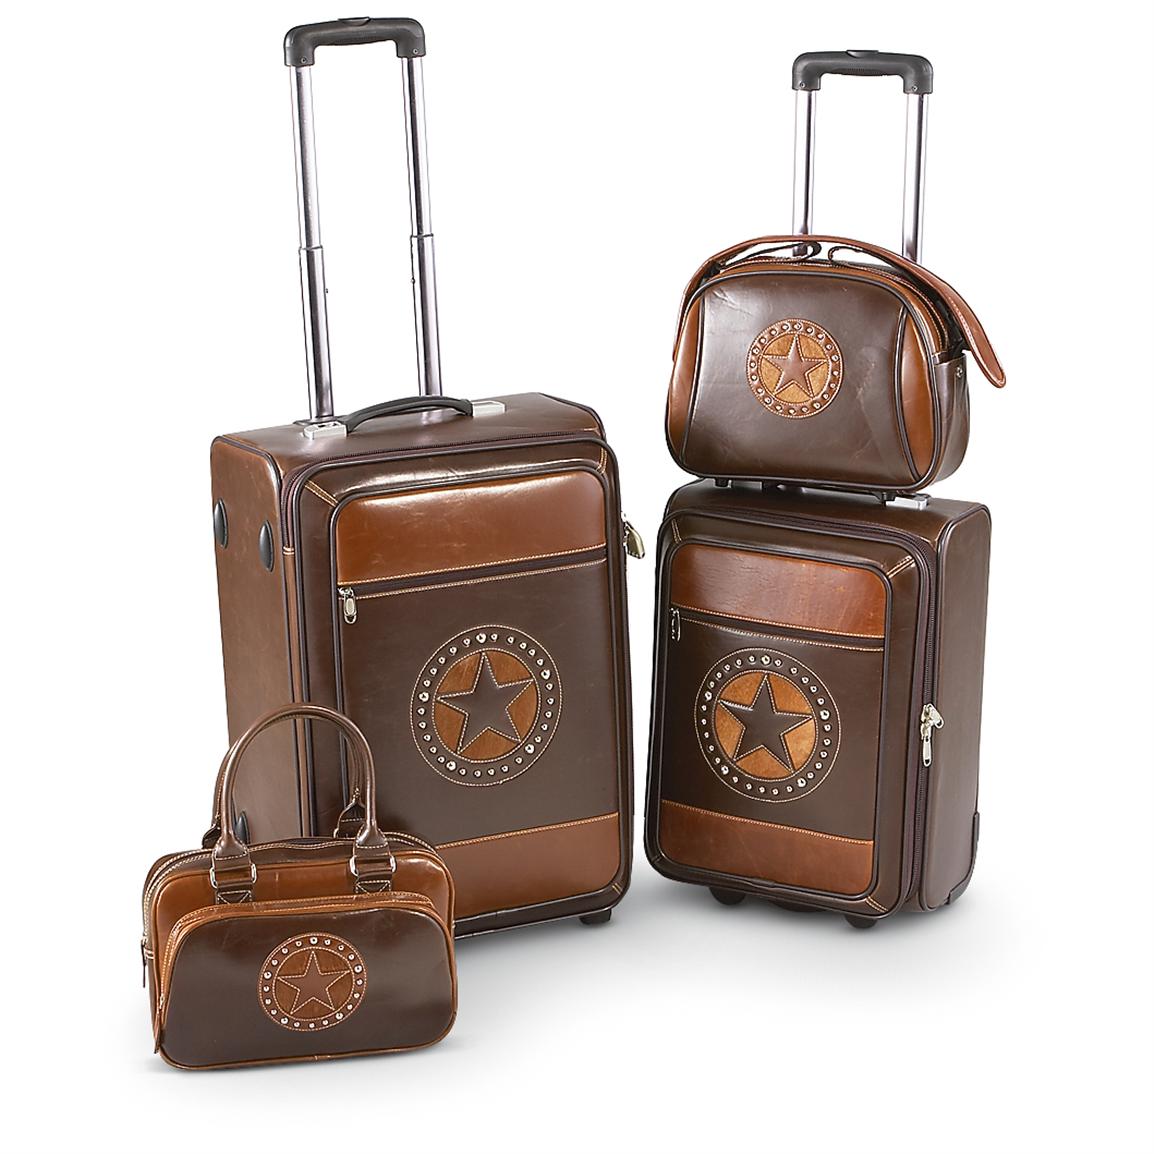 Luxury Luggage Sets For Men | Paul Smith